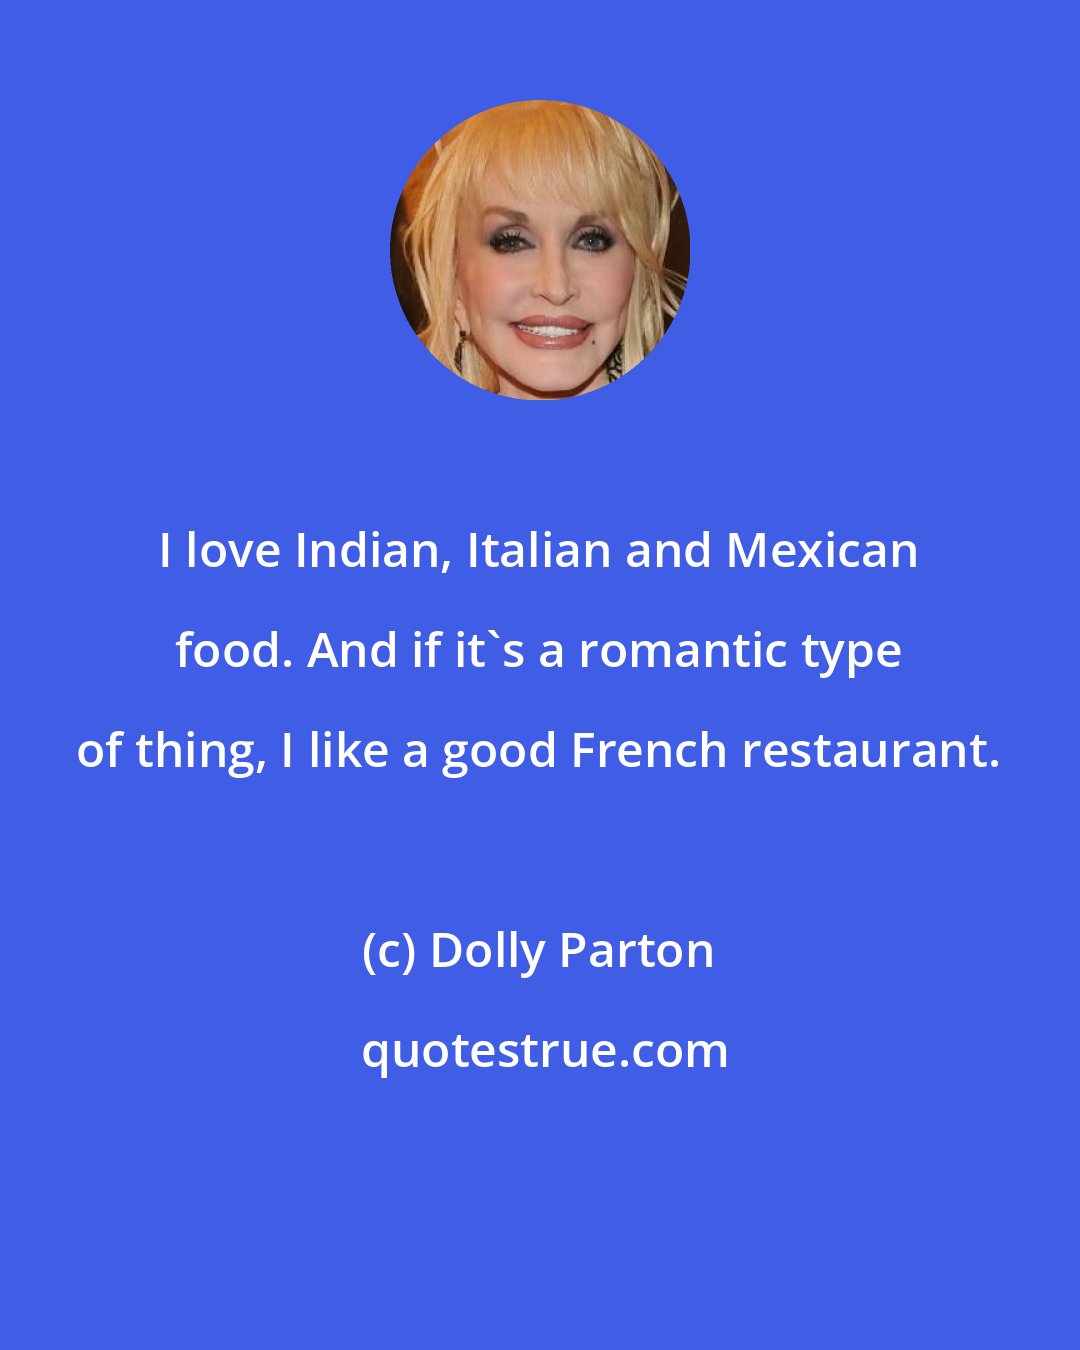 Dolly Parton: I love Indian, Italian and Mexican food. And if it's a romantic type of thing, I like a good French restaurant.